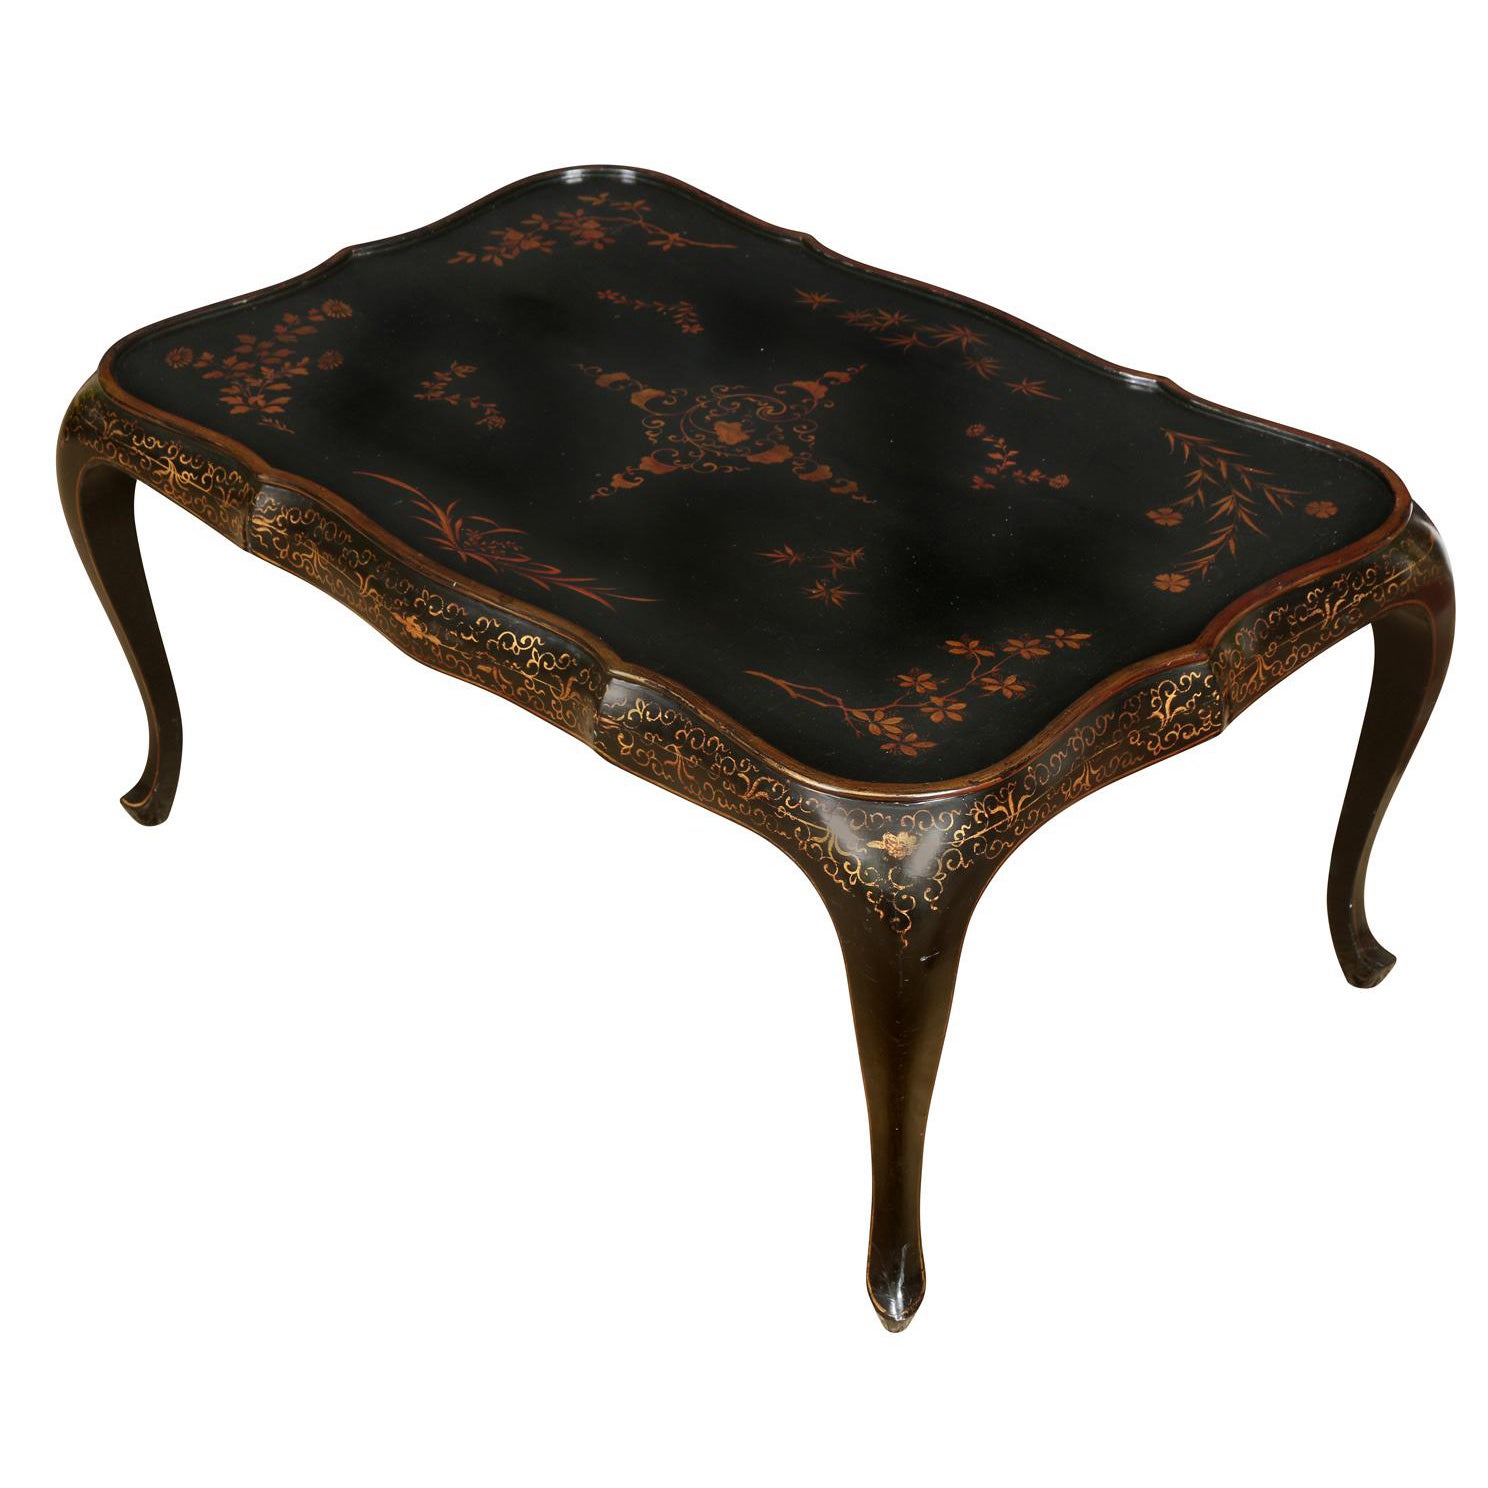 A Black Lacquer and Gold Cocktail Table For Sale